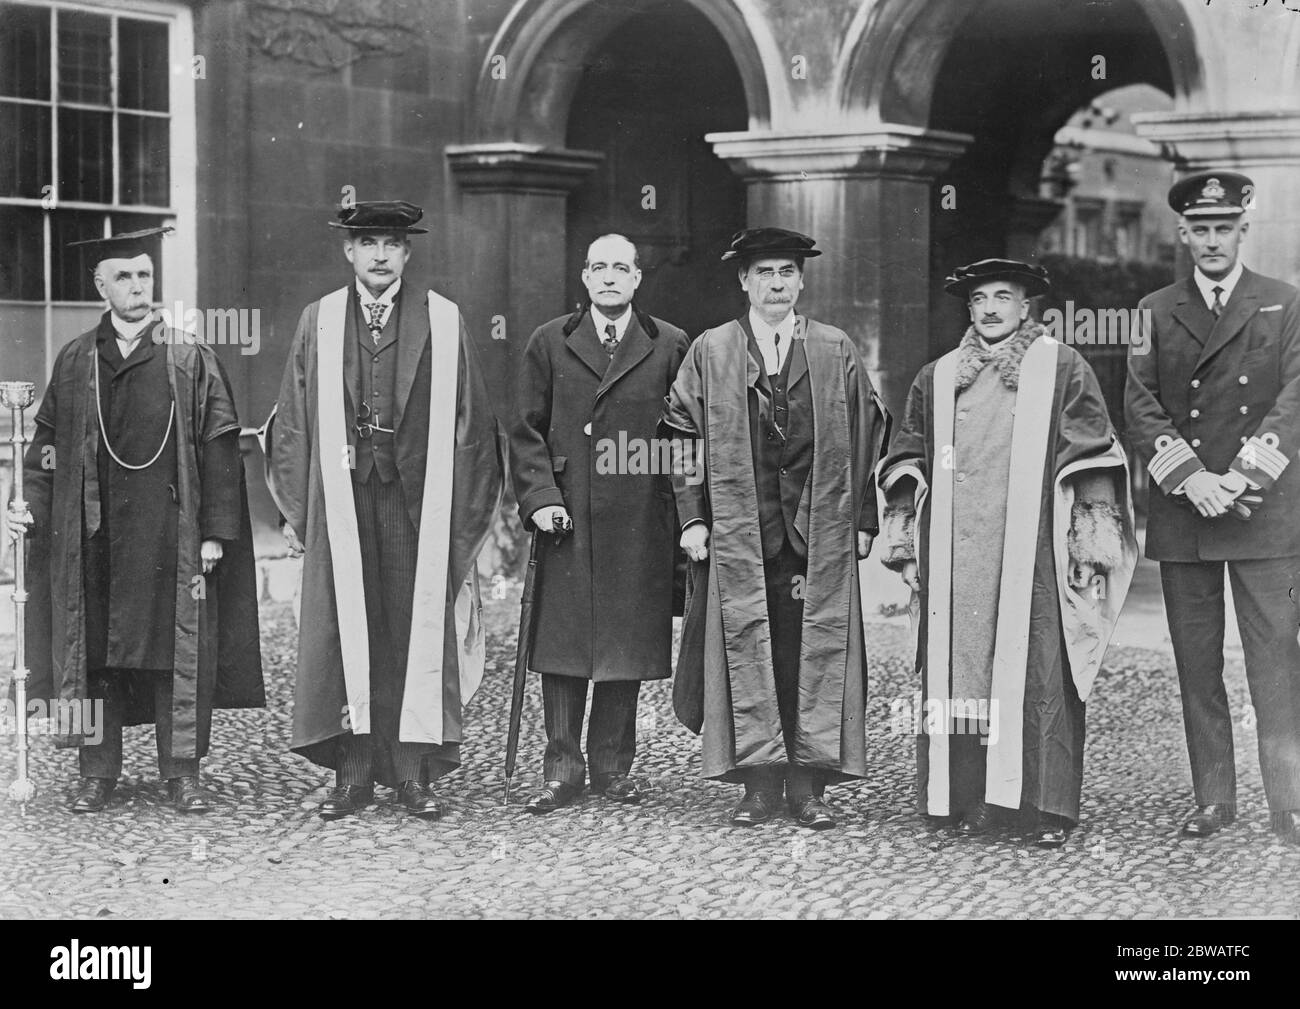 Conferring Degrees in Senate House . Cambridge On October 31 Honorary degrees were conferred on General Diaz and Mr J P Morgan ( John Pierpont Morgan, Jr ) at Cambridge . Photo shows : Mr A H Evans ( Esquire Bedell ) , J P Morgan , Marquis Imperiali Di Francaville , Dr P Giles , Vice Chancellor of Cambridge , General Diaz , Captain E Fullerton ( Royal Navy ) , D S O , Mr R Hamilton Smith ( Esquire Bedell ) guests of Emanuel College May 1922 Stock Photo